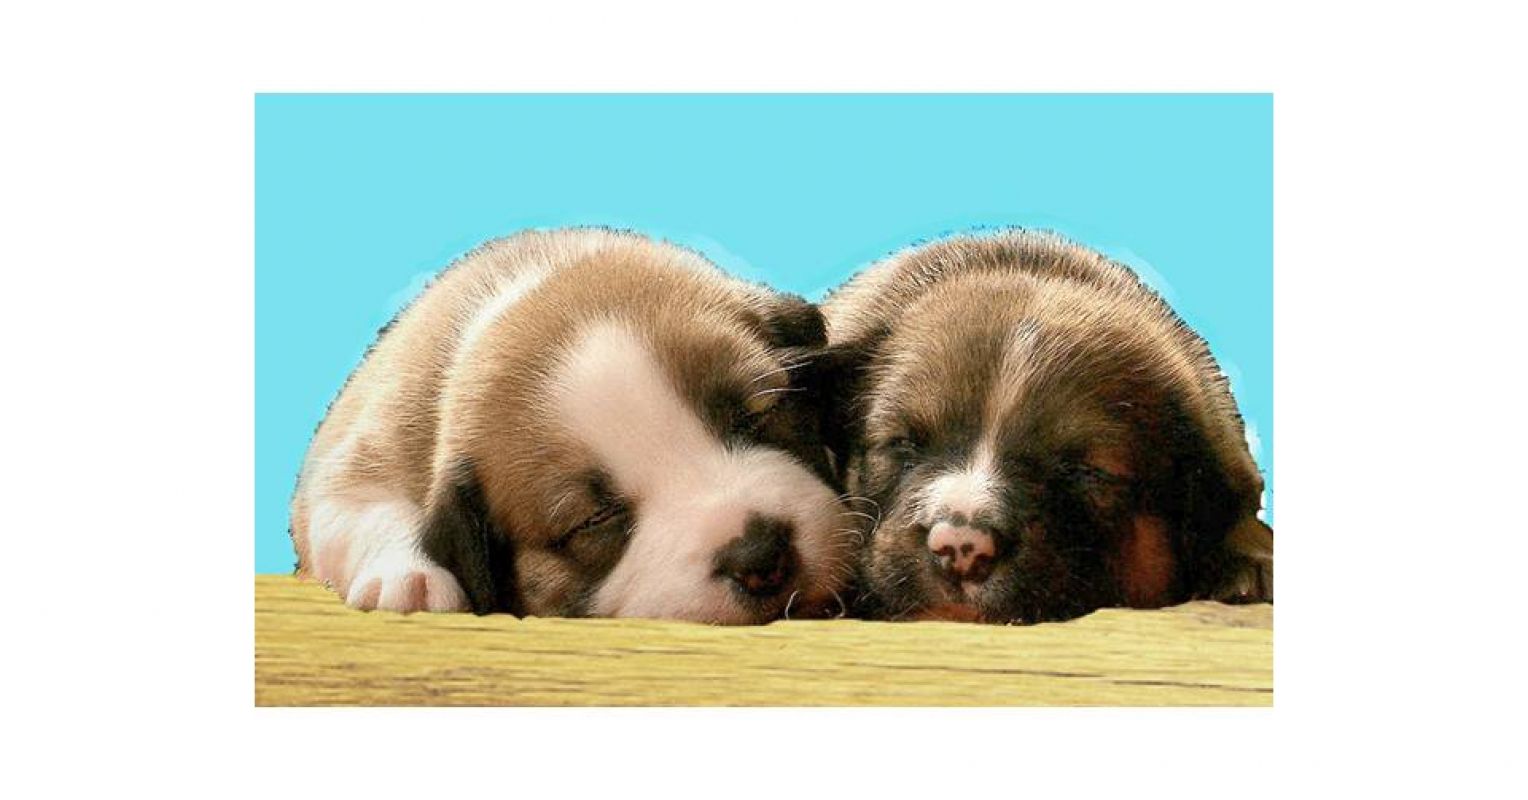 Why Are Puppies Born With Their Eyes and Ears Closed? | Psychology Today